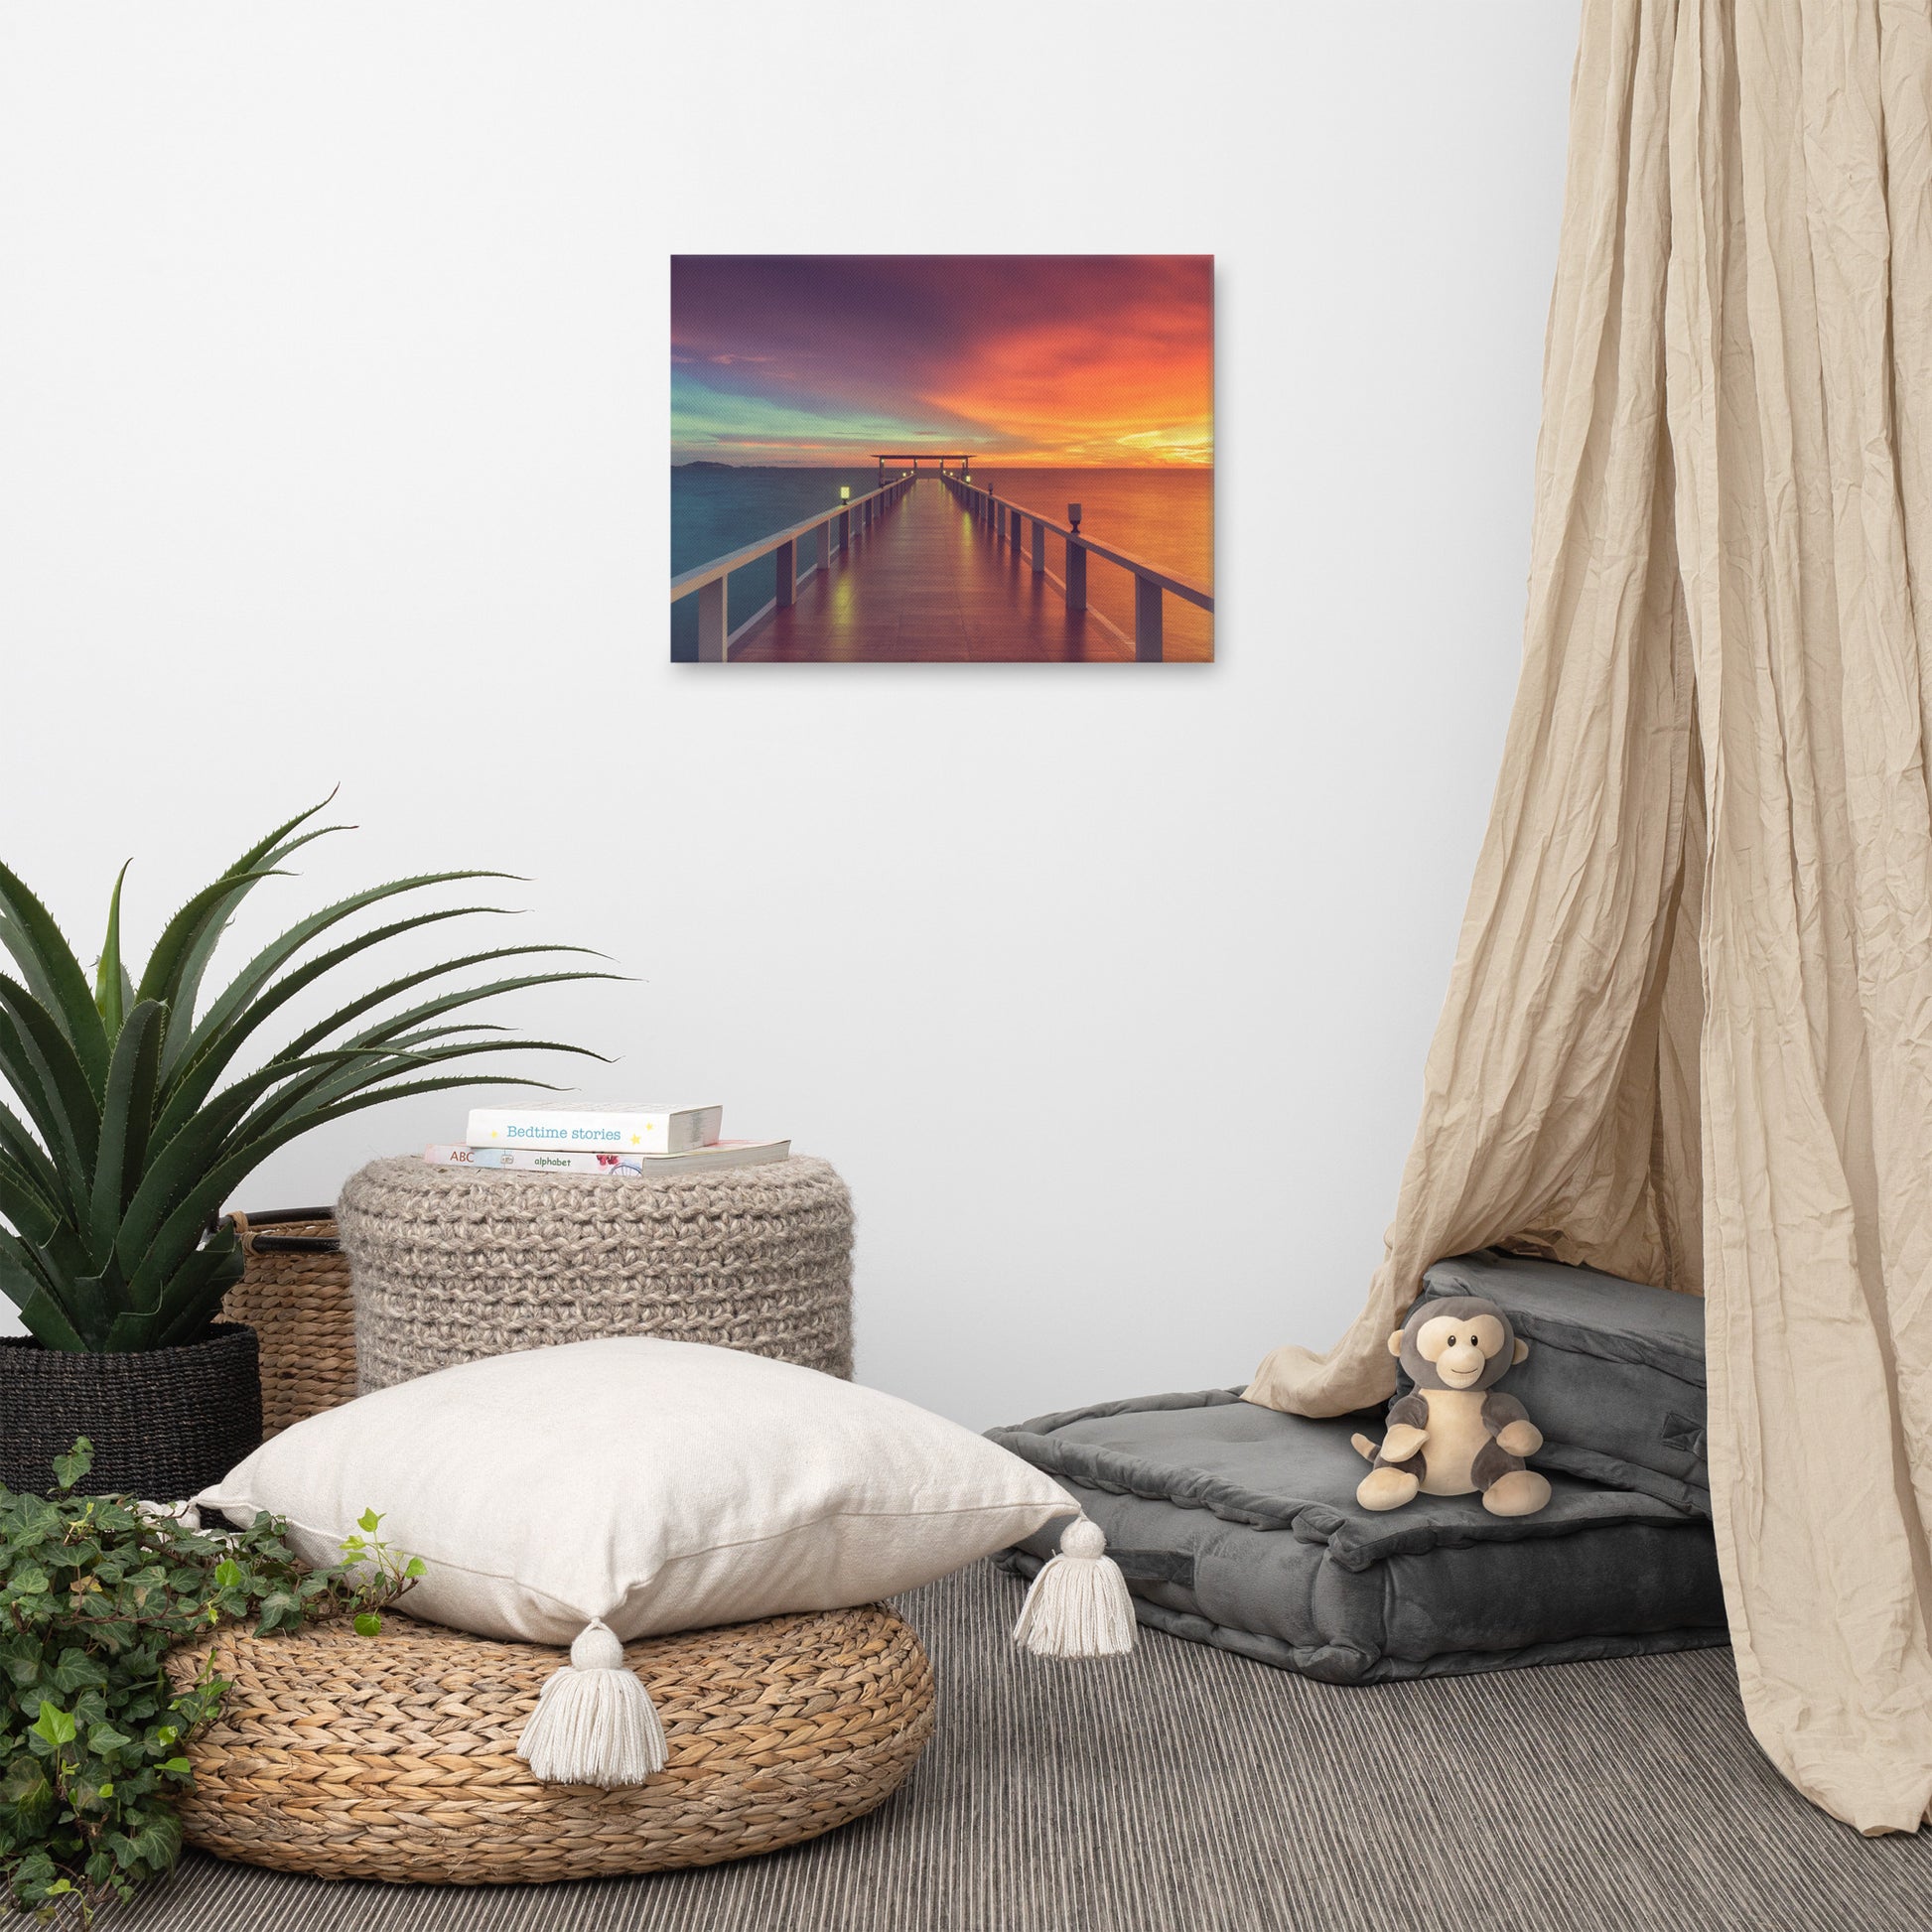 Wall Features Bedroom: Surreal Wooden Pier At Sunset with Intrigued Effect Landscape Photo Canvas Wall Art Prints